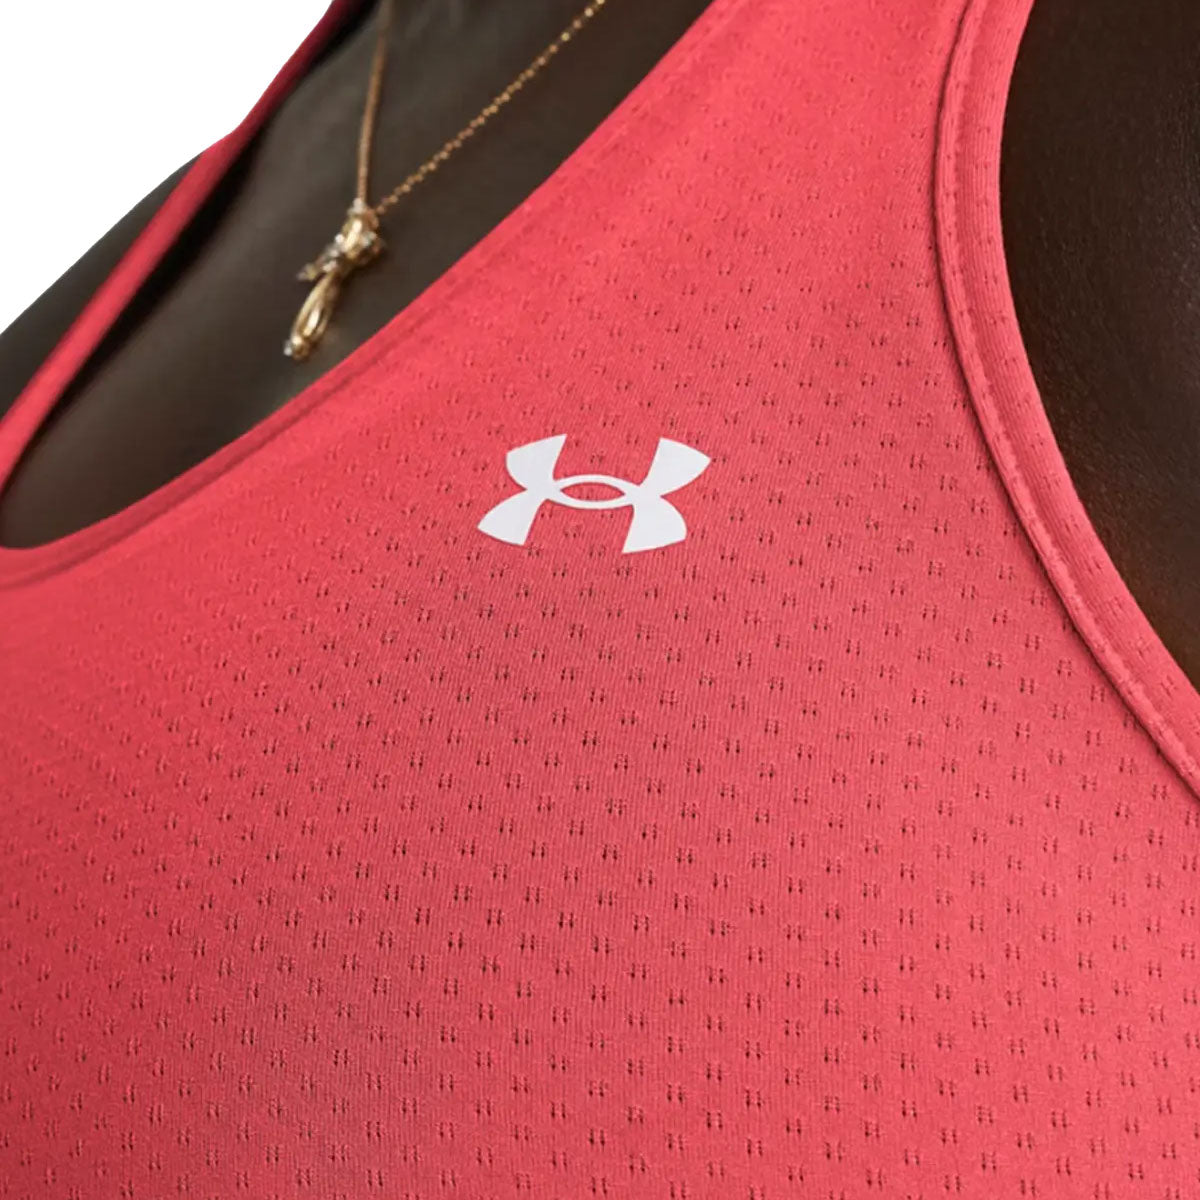 Under Armour HeatGear Armour Racer Tank Top - Womens - Red Solstice/White